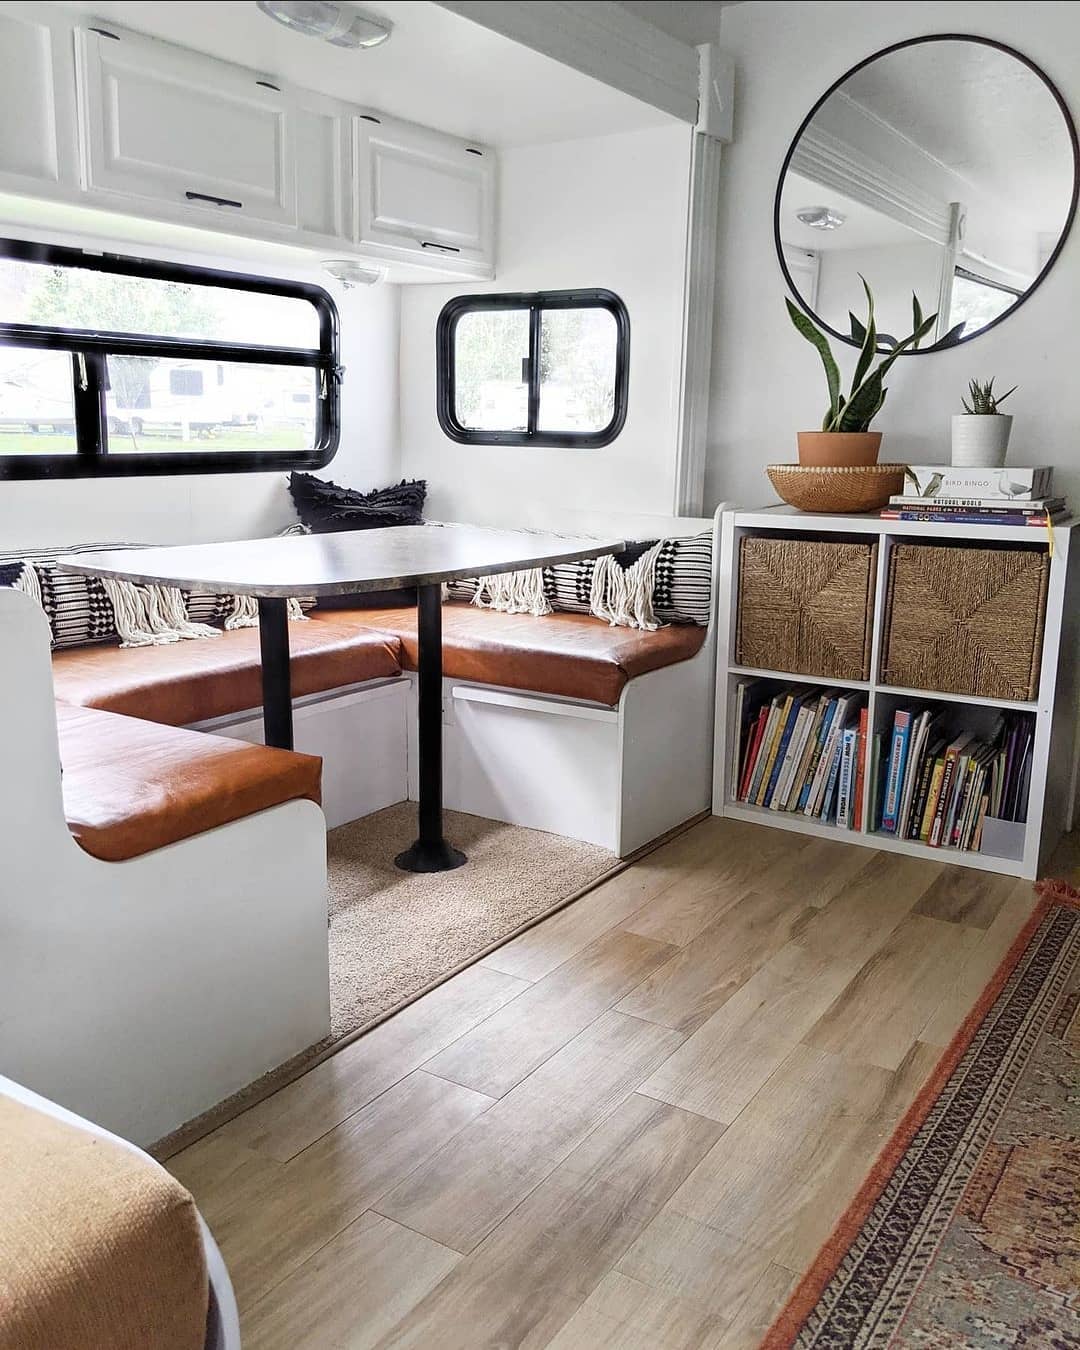 How to Replace RV Furniture: Your Questions Answered